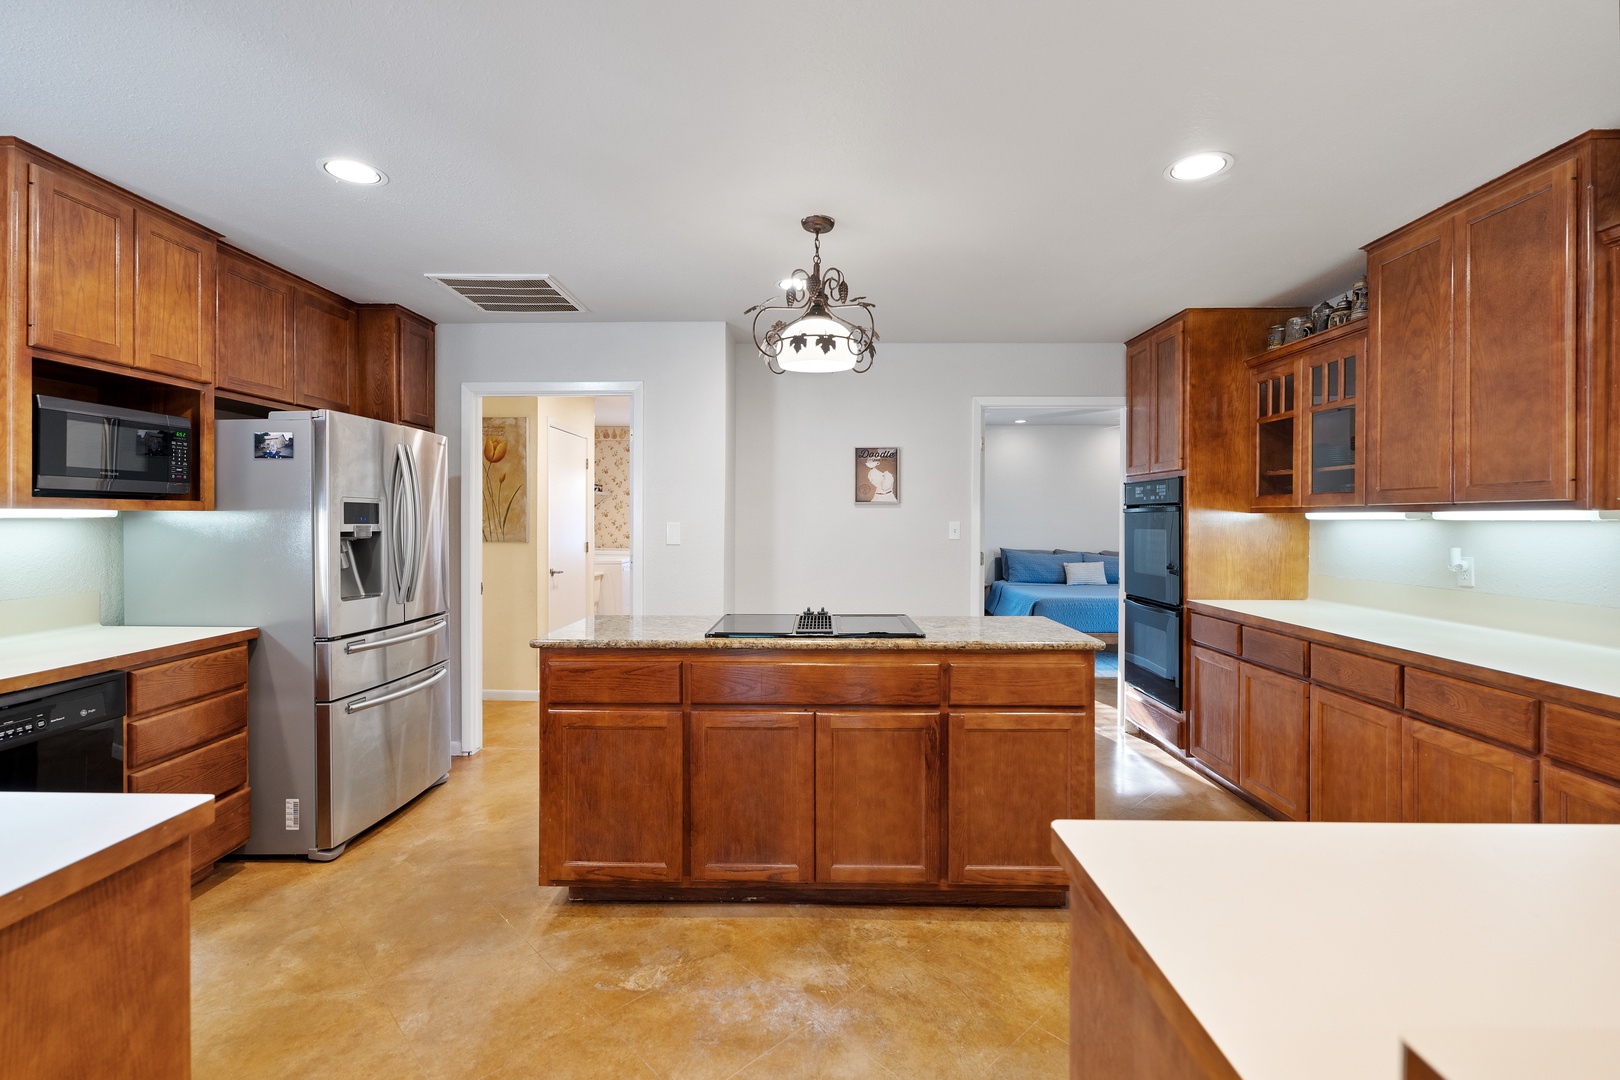 The kitchen is spacious and open, with all the comforts of home